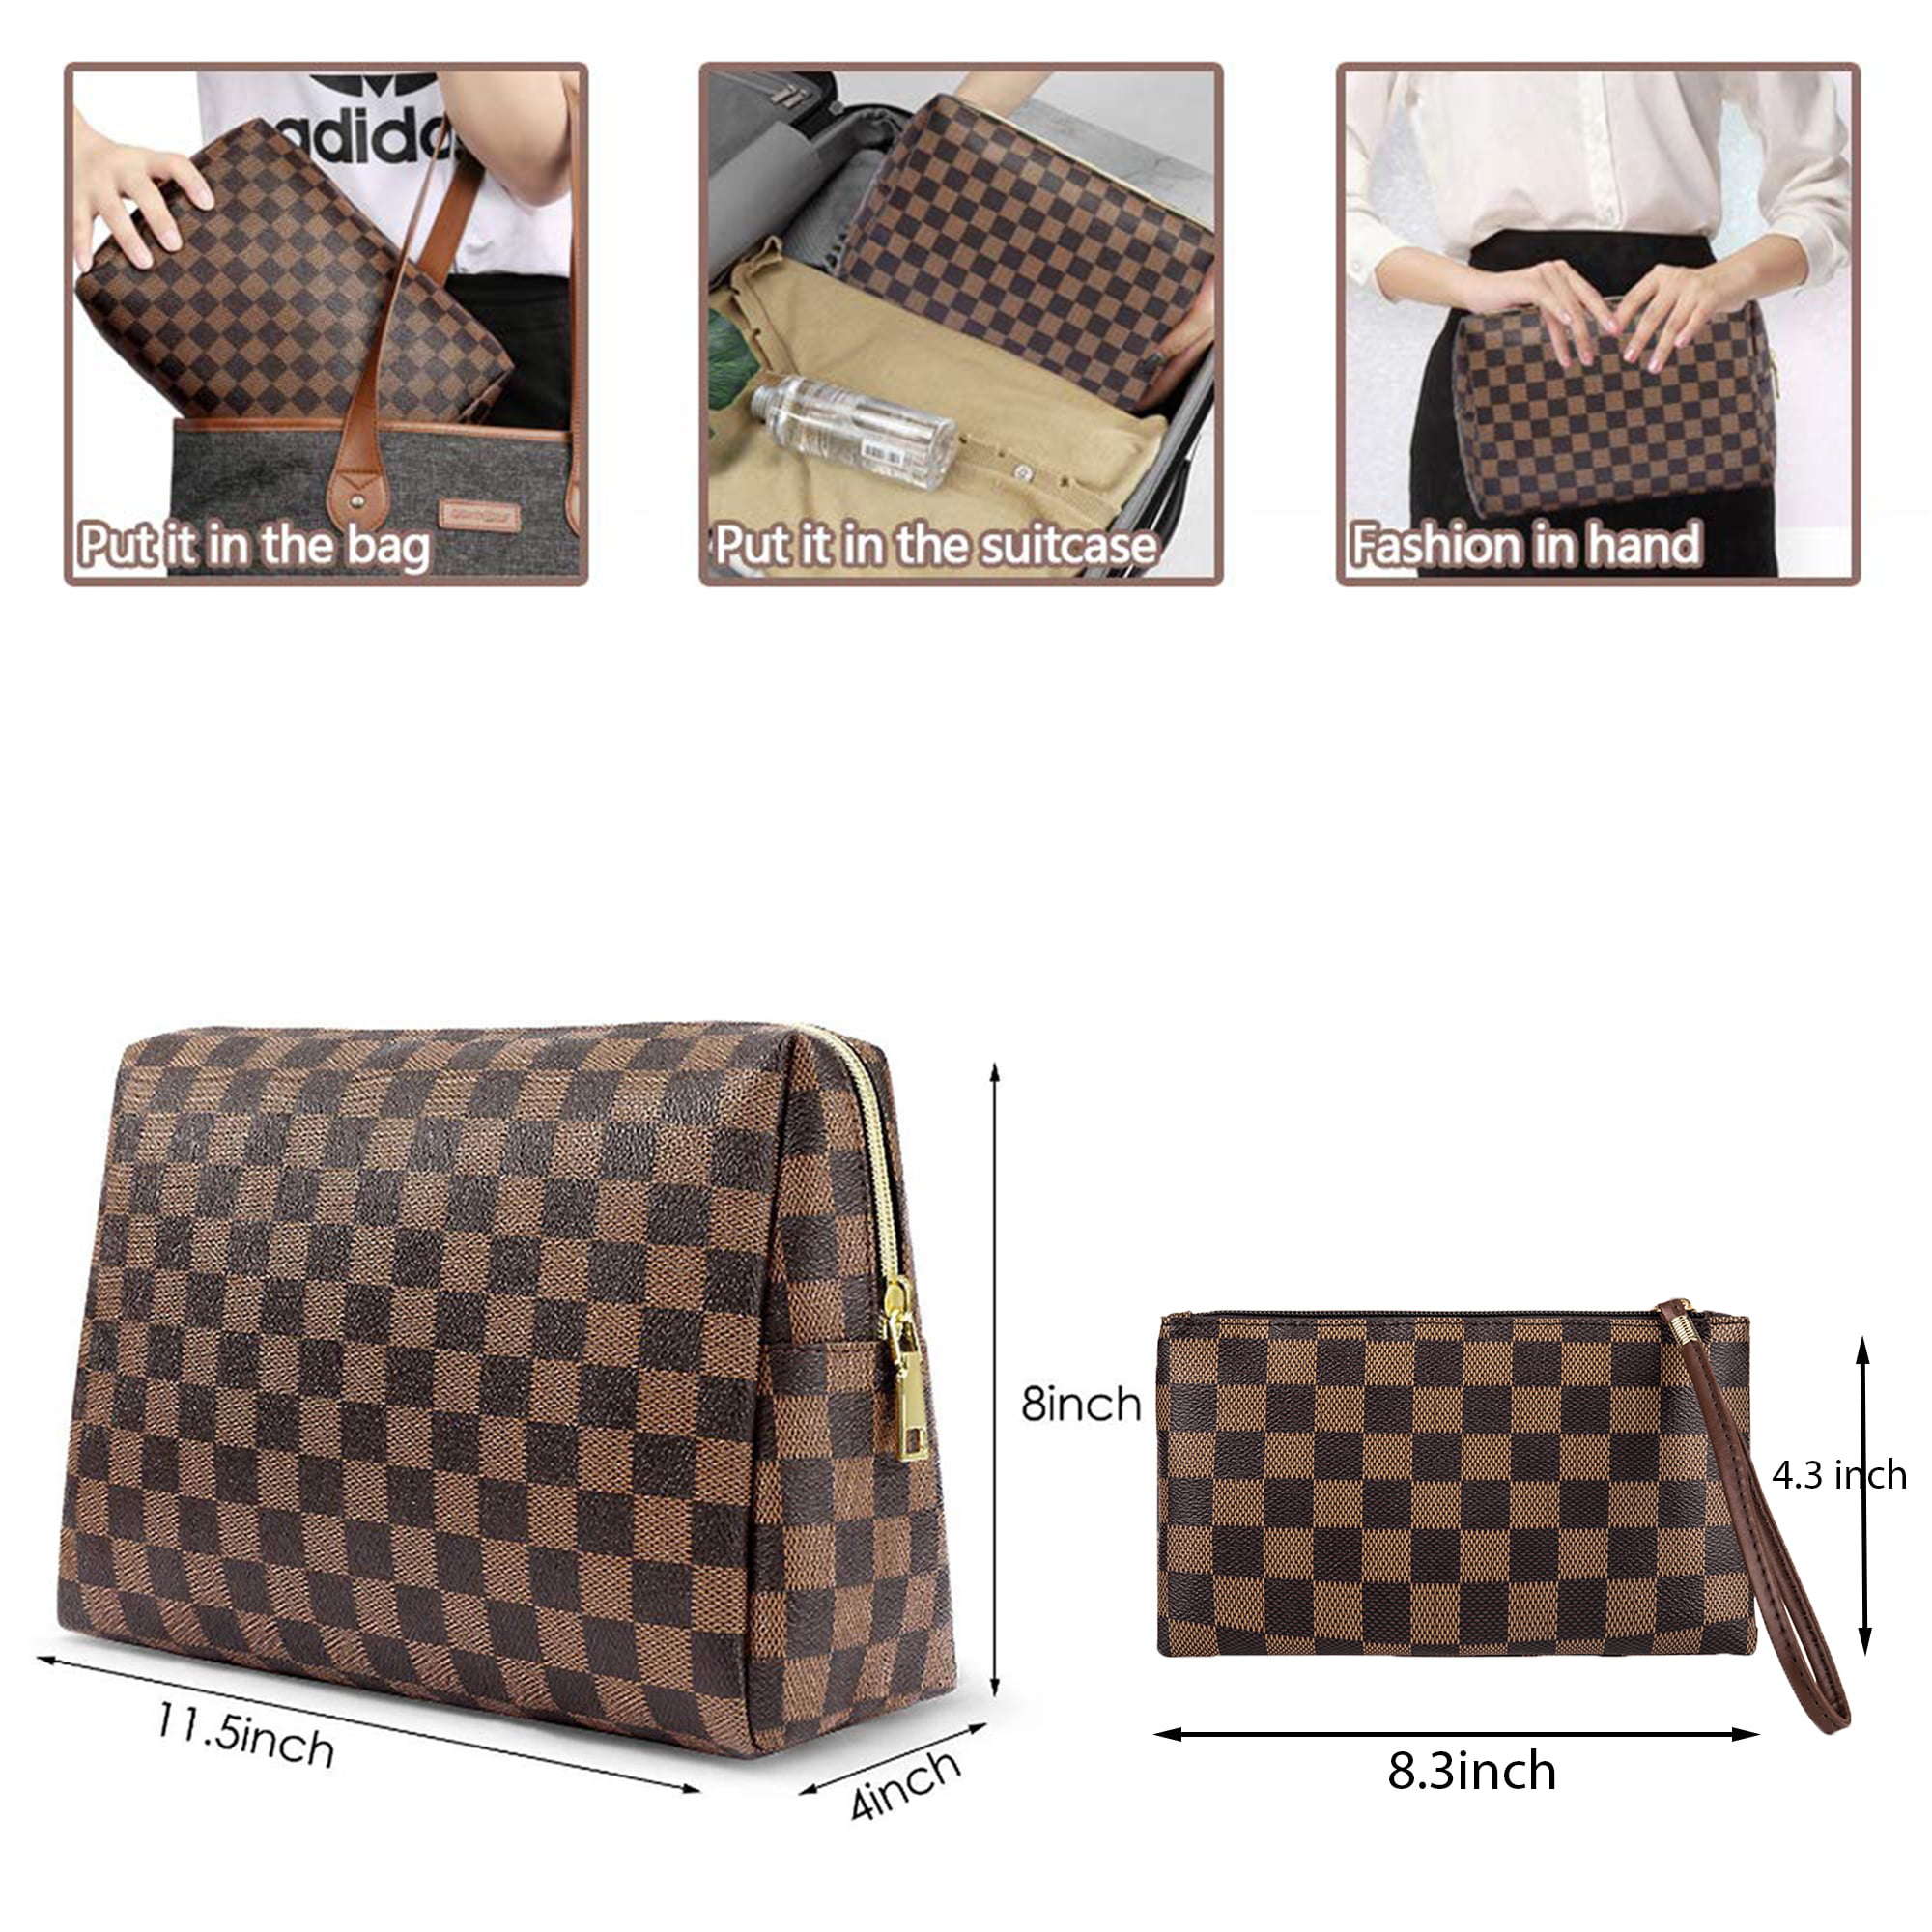 LOKASS Makeup Bag for Women Checkered Travel Case Leather Cosmetic Organizer Tools Toiletry Jewelry, Size: 10.2 x 9.4 x 3.7, Brown